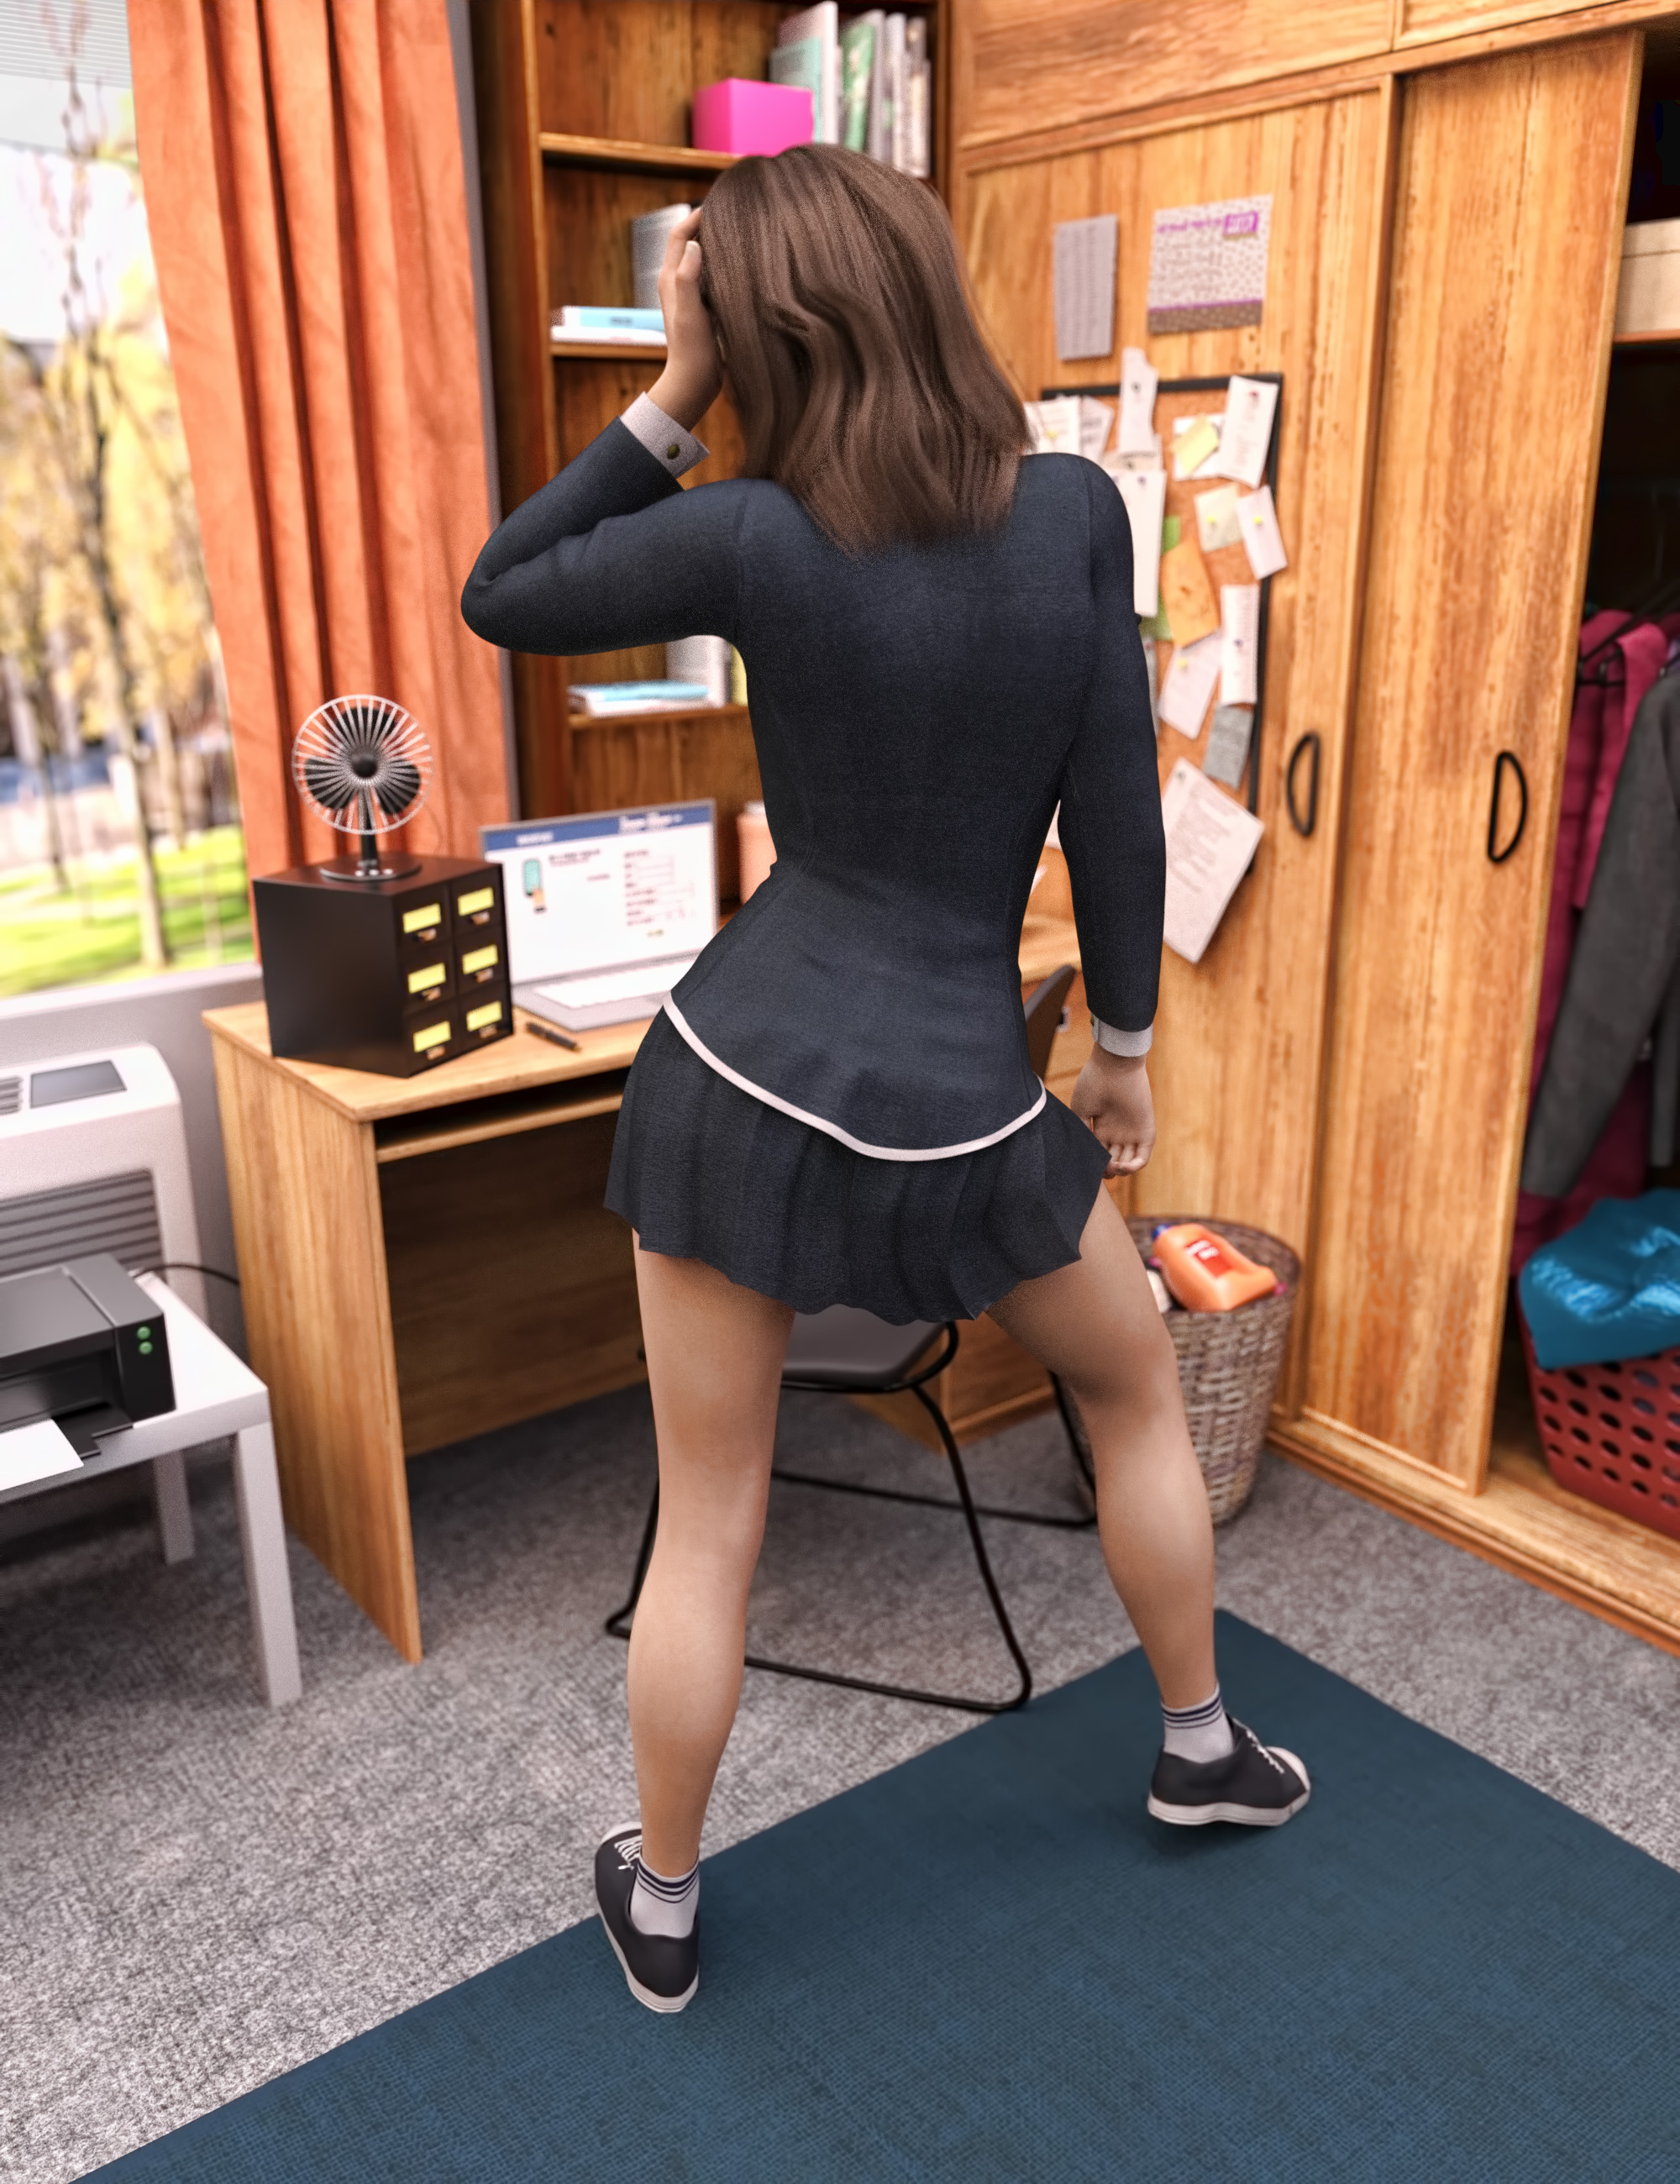 i13 College Uniform for the Genesis 3 Female(s) by: ironman13, 3D Models by Daz 3D